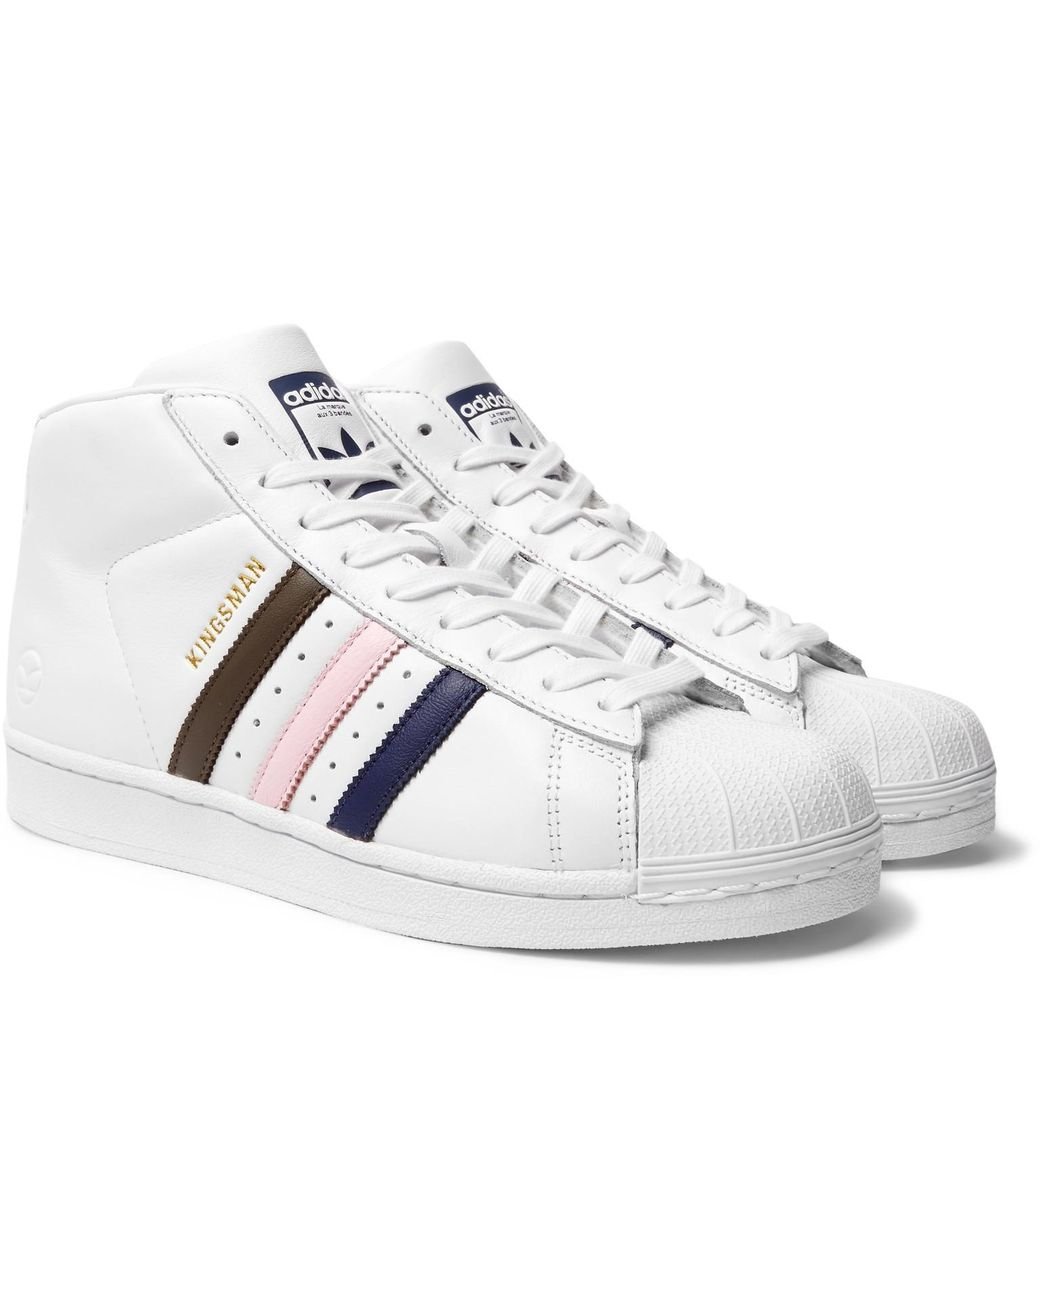 Kingsman + Adidas Originals Superstar Pro Numbered Leather High-top Sneakers  in White for Men | Lyst